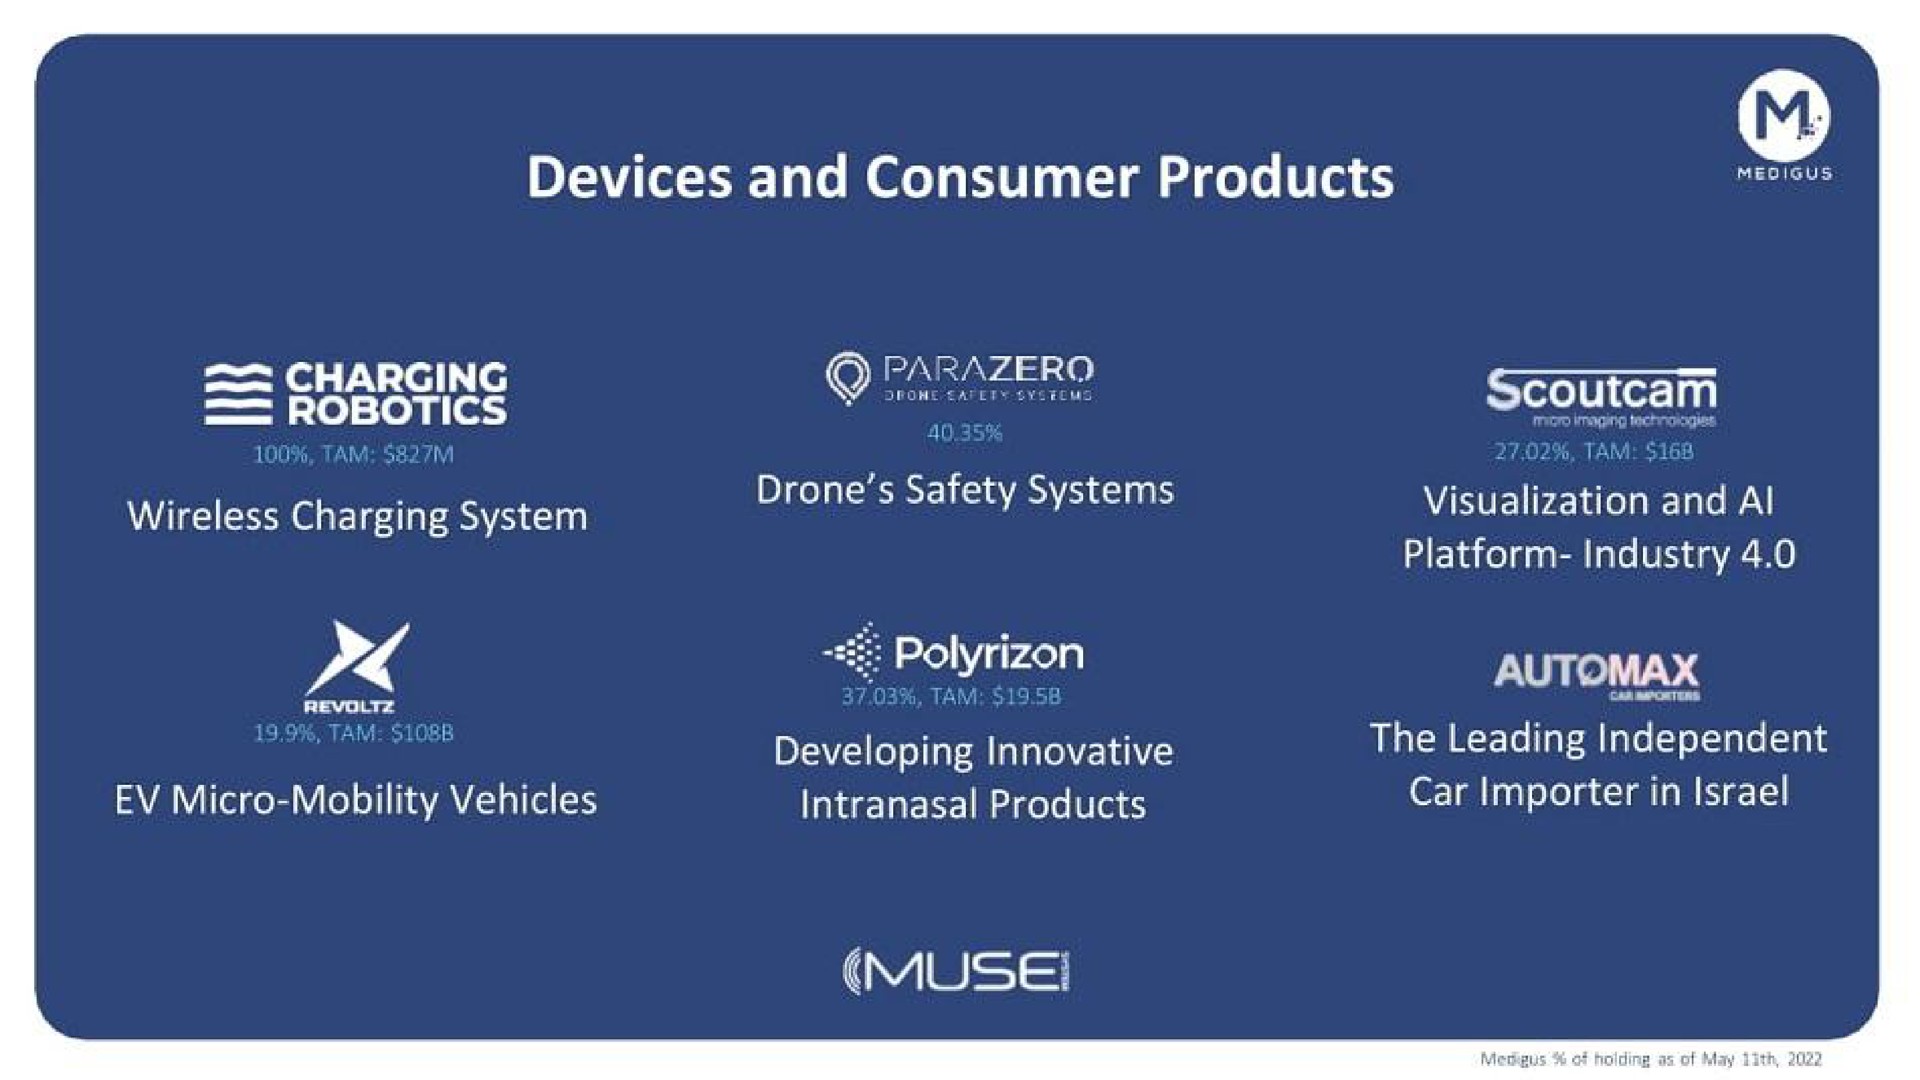 devices and consumer products olena muse pee tay | Medigus